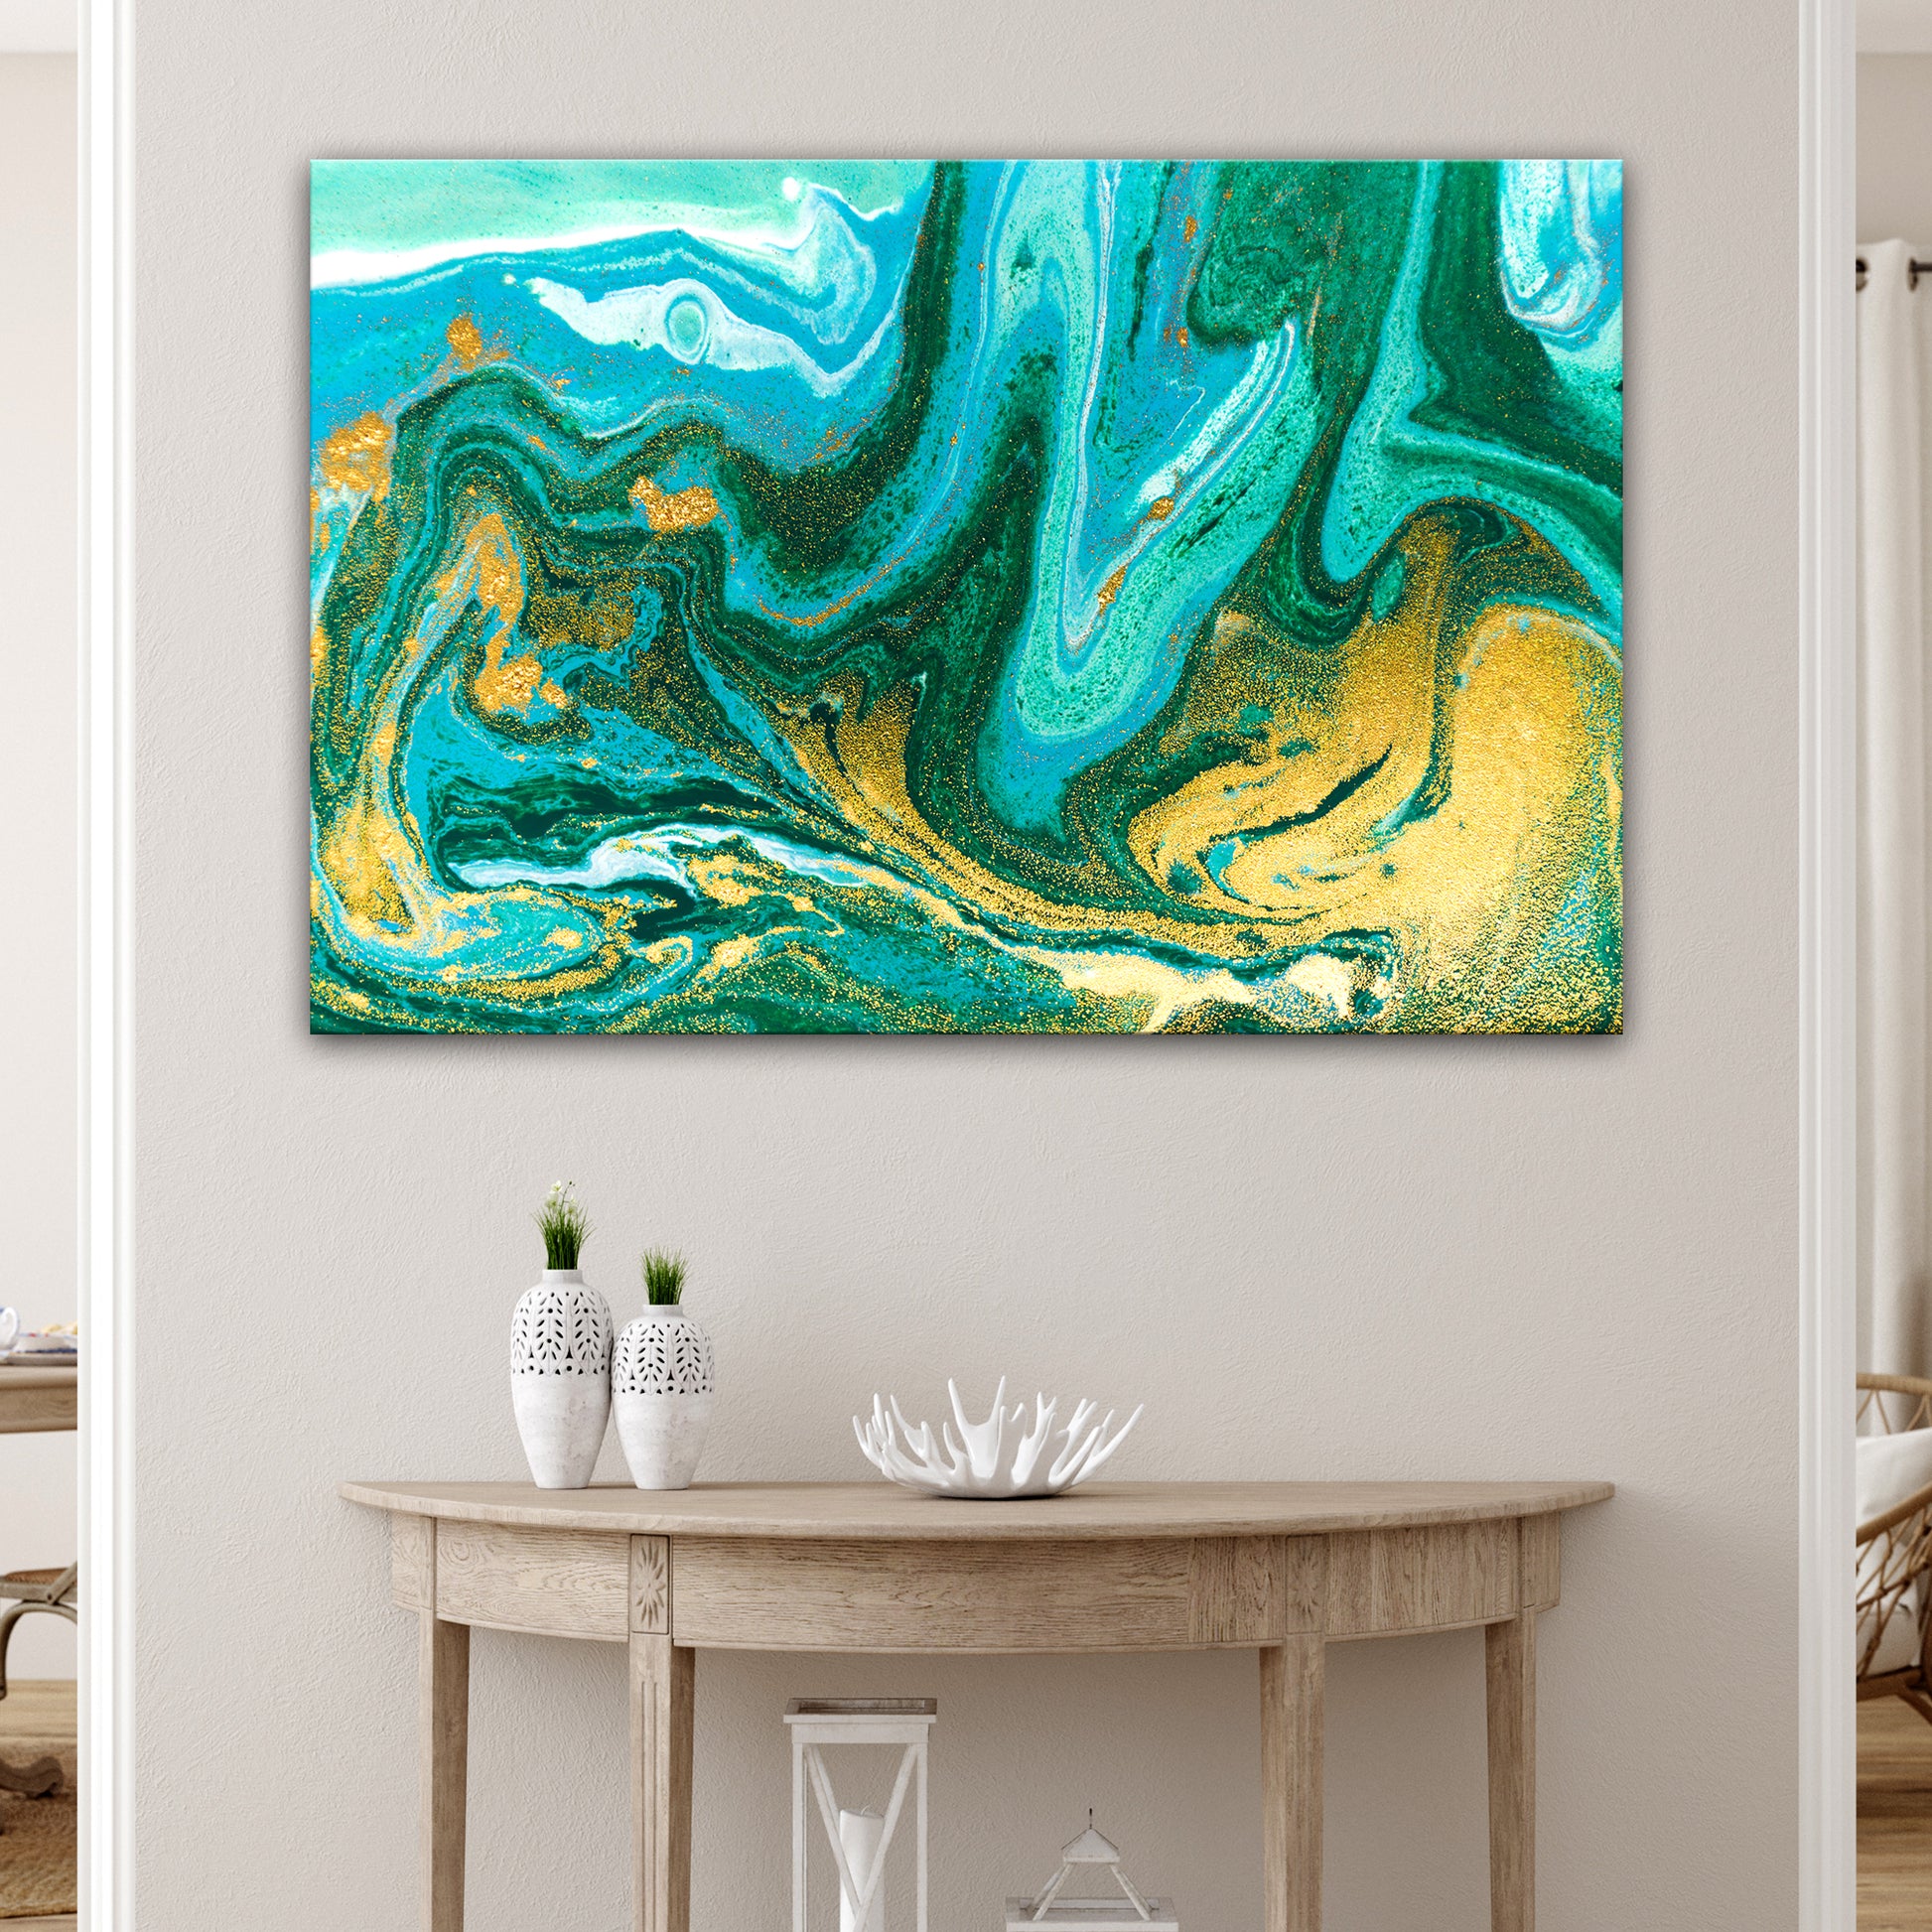 Abstract Blooming Sea - Image by Tailored Canvases